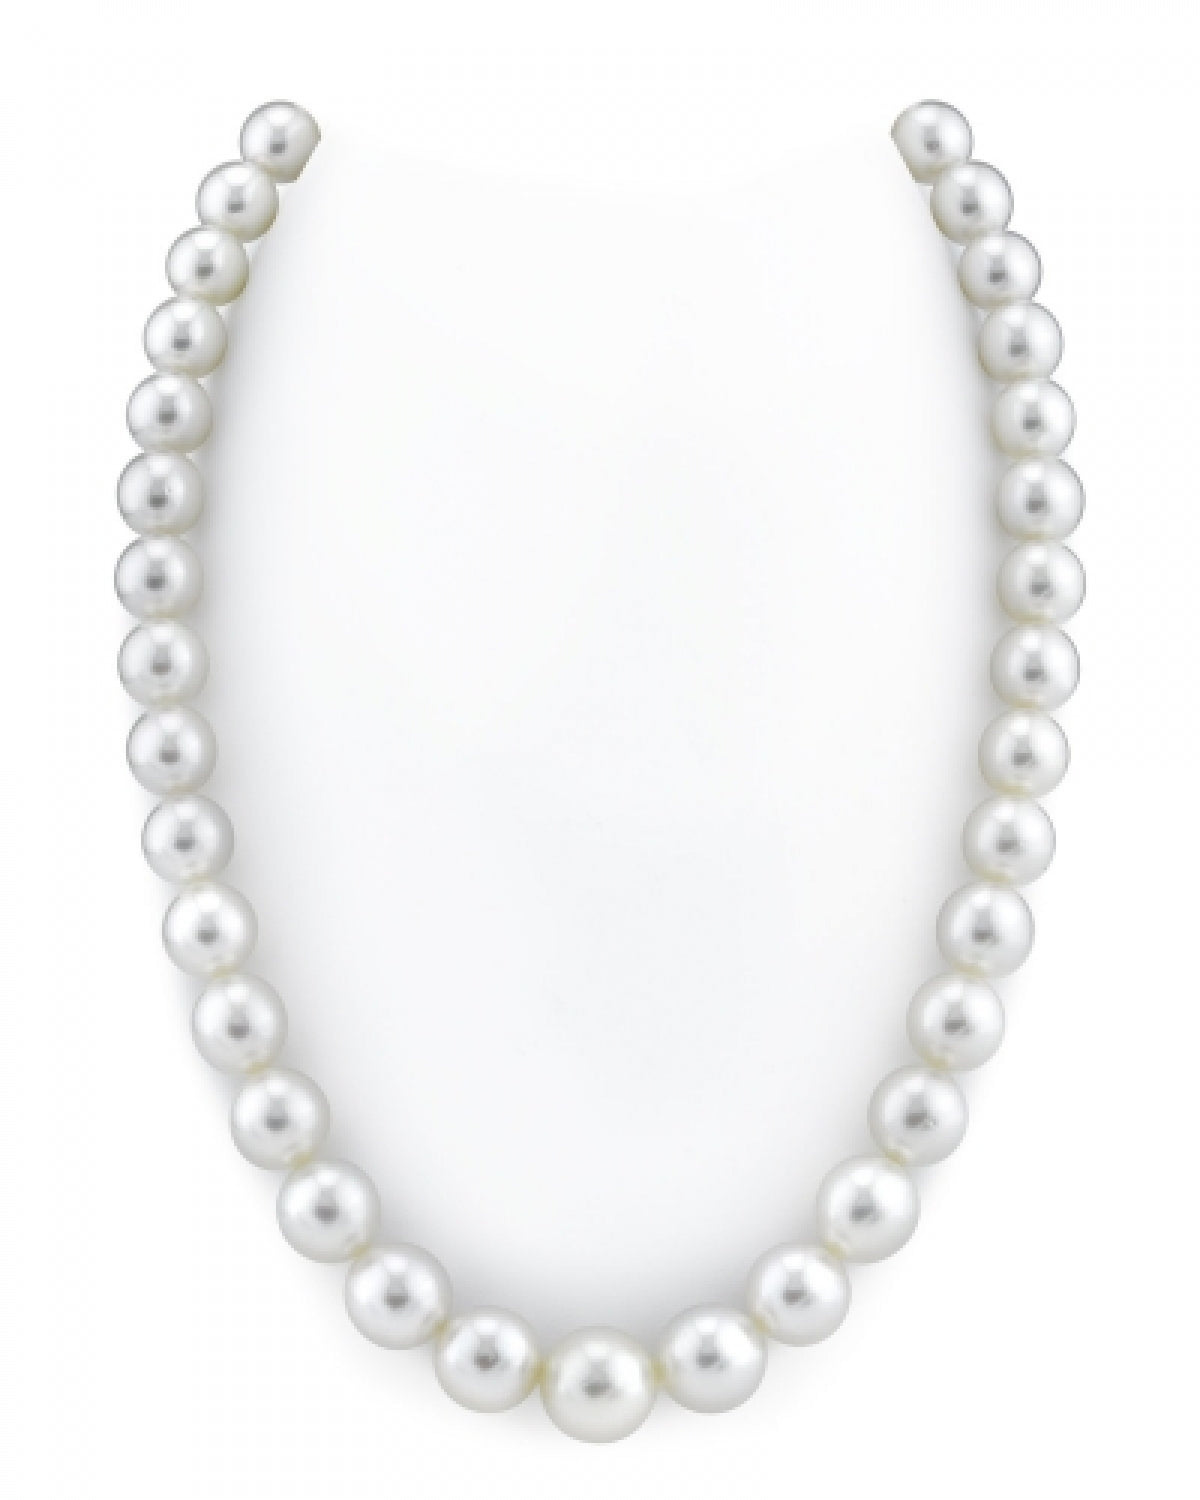 10-11mm White South Sea Pearl Necklace - AAAA Quality